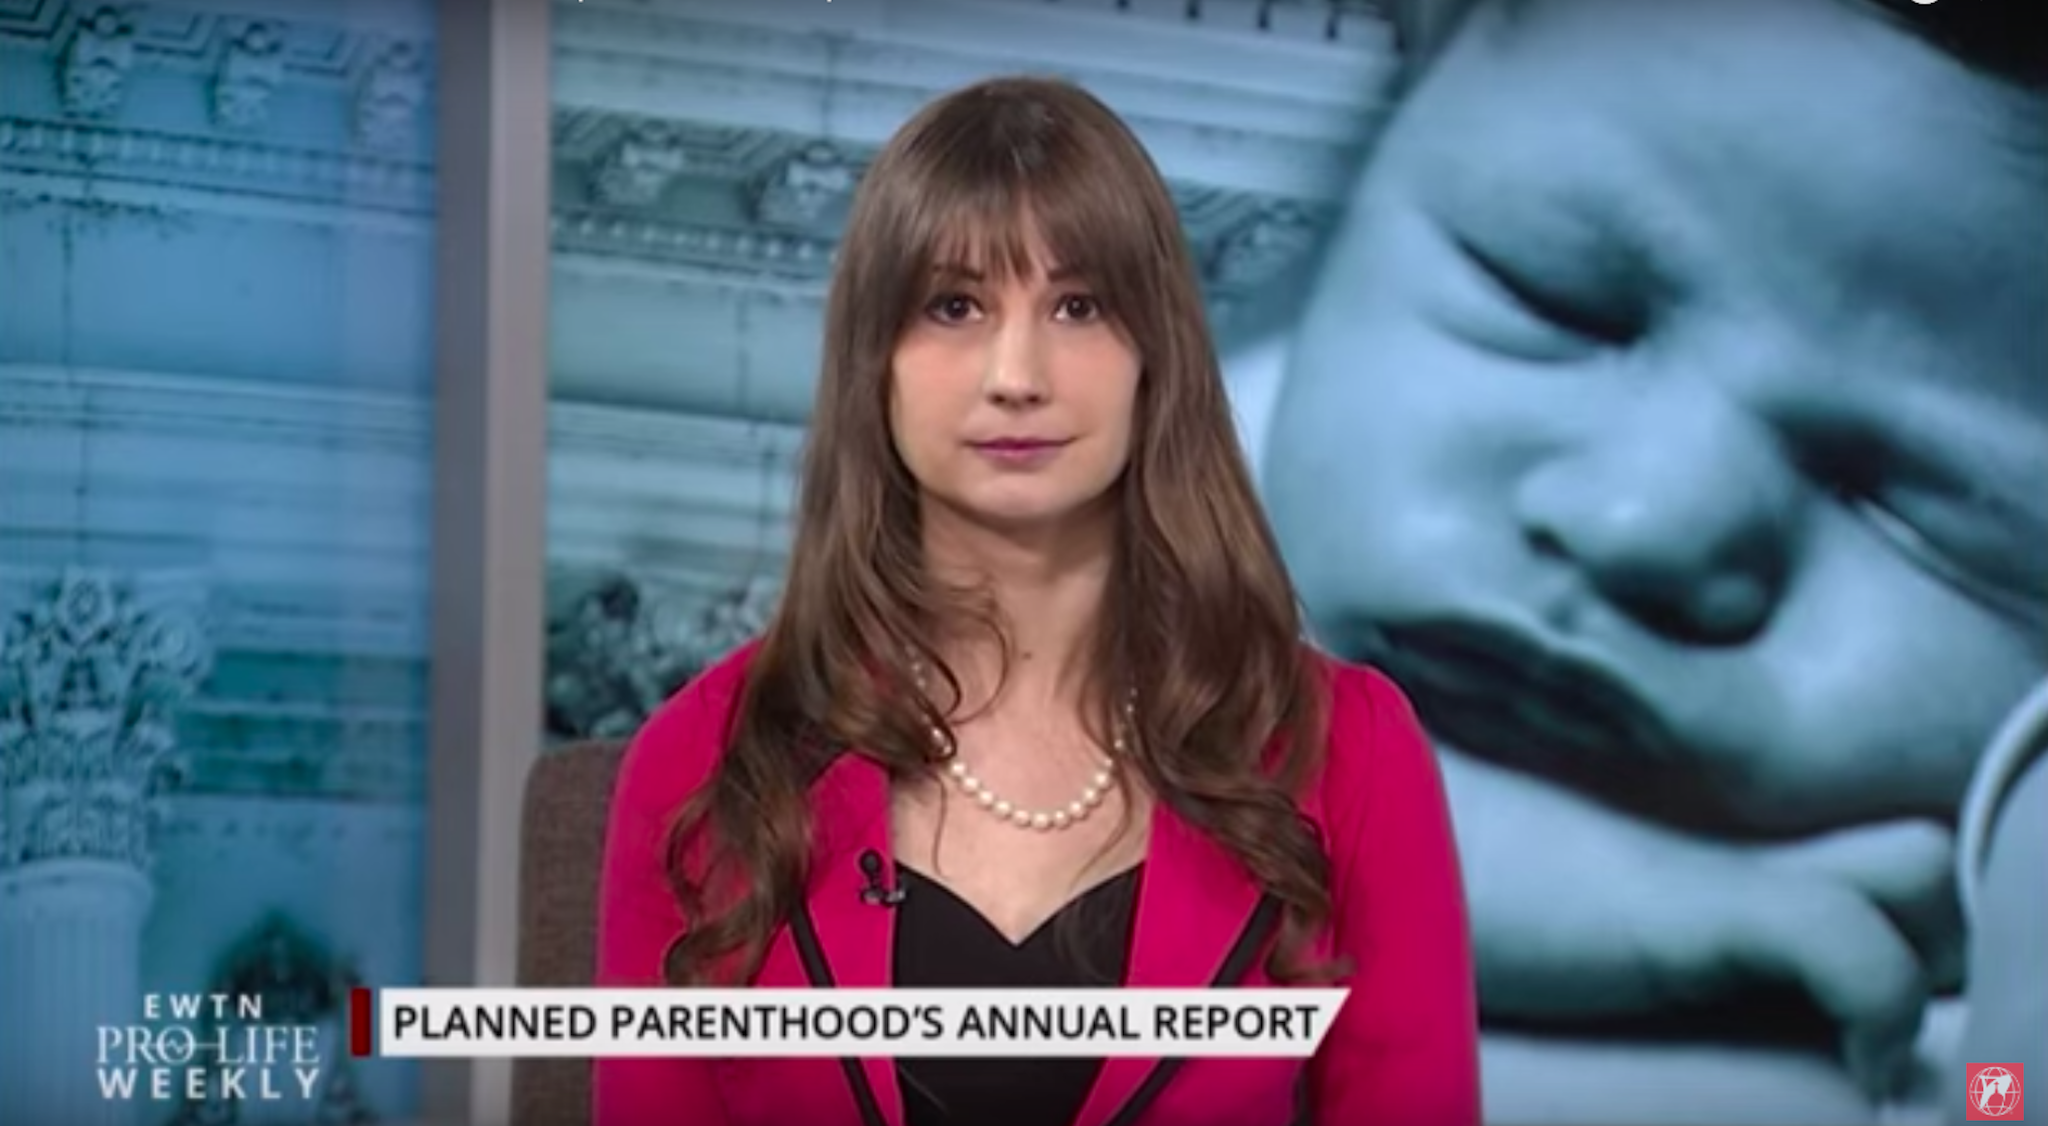 Ashe Schow appears on EWTN's "Pro-Life Weekly" to discuss Planned Parenthood's annual report.